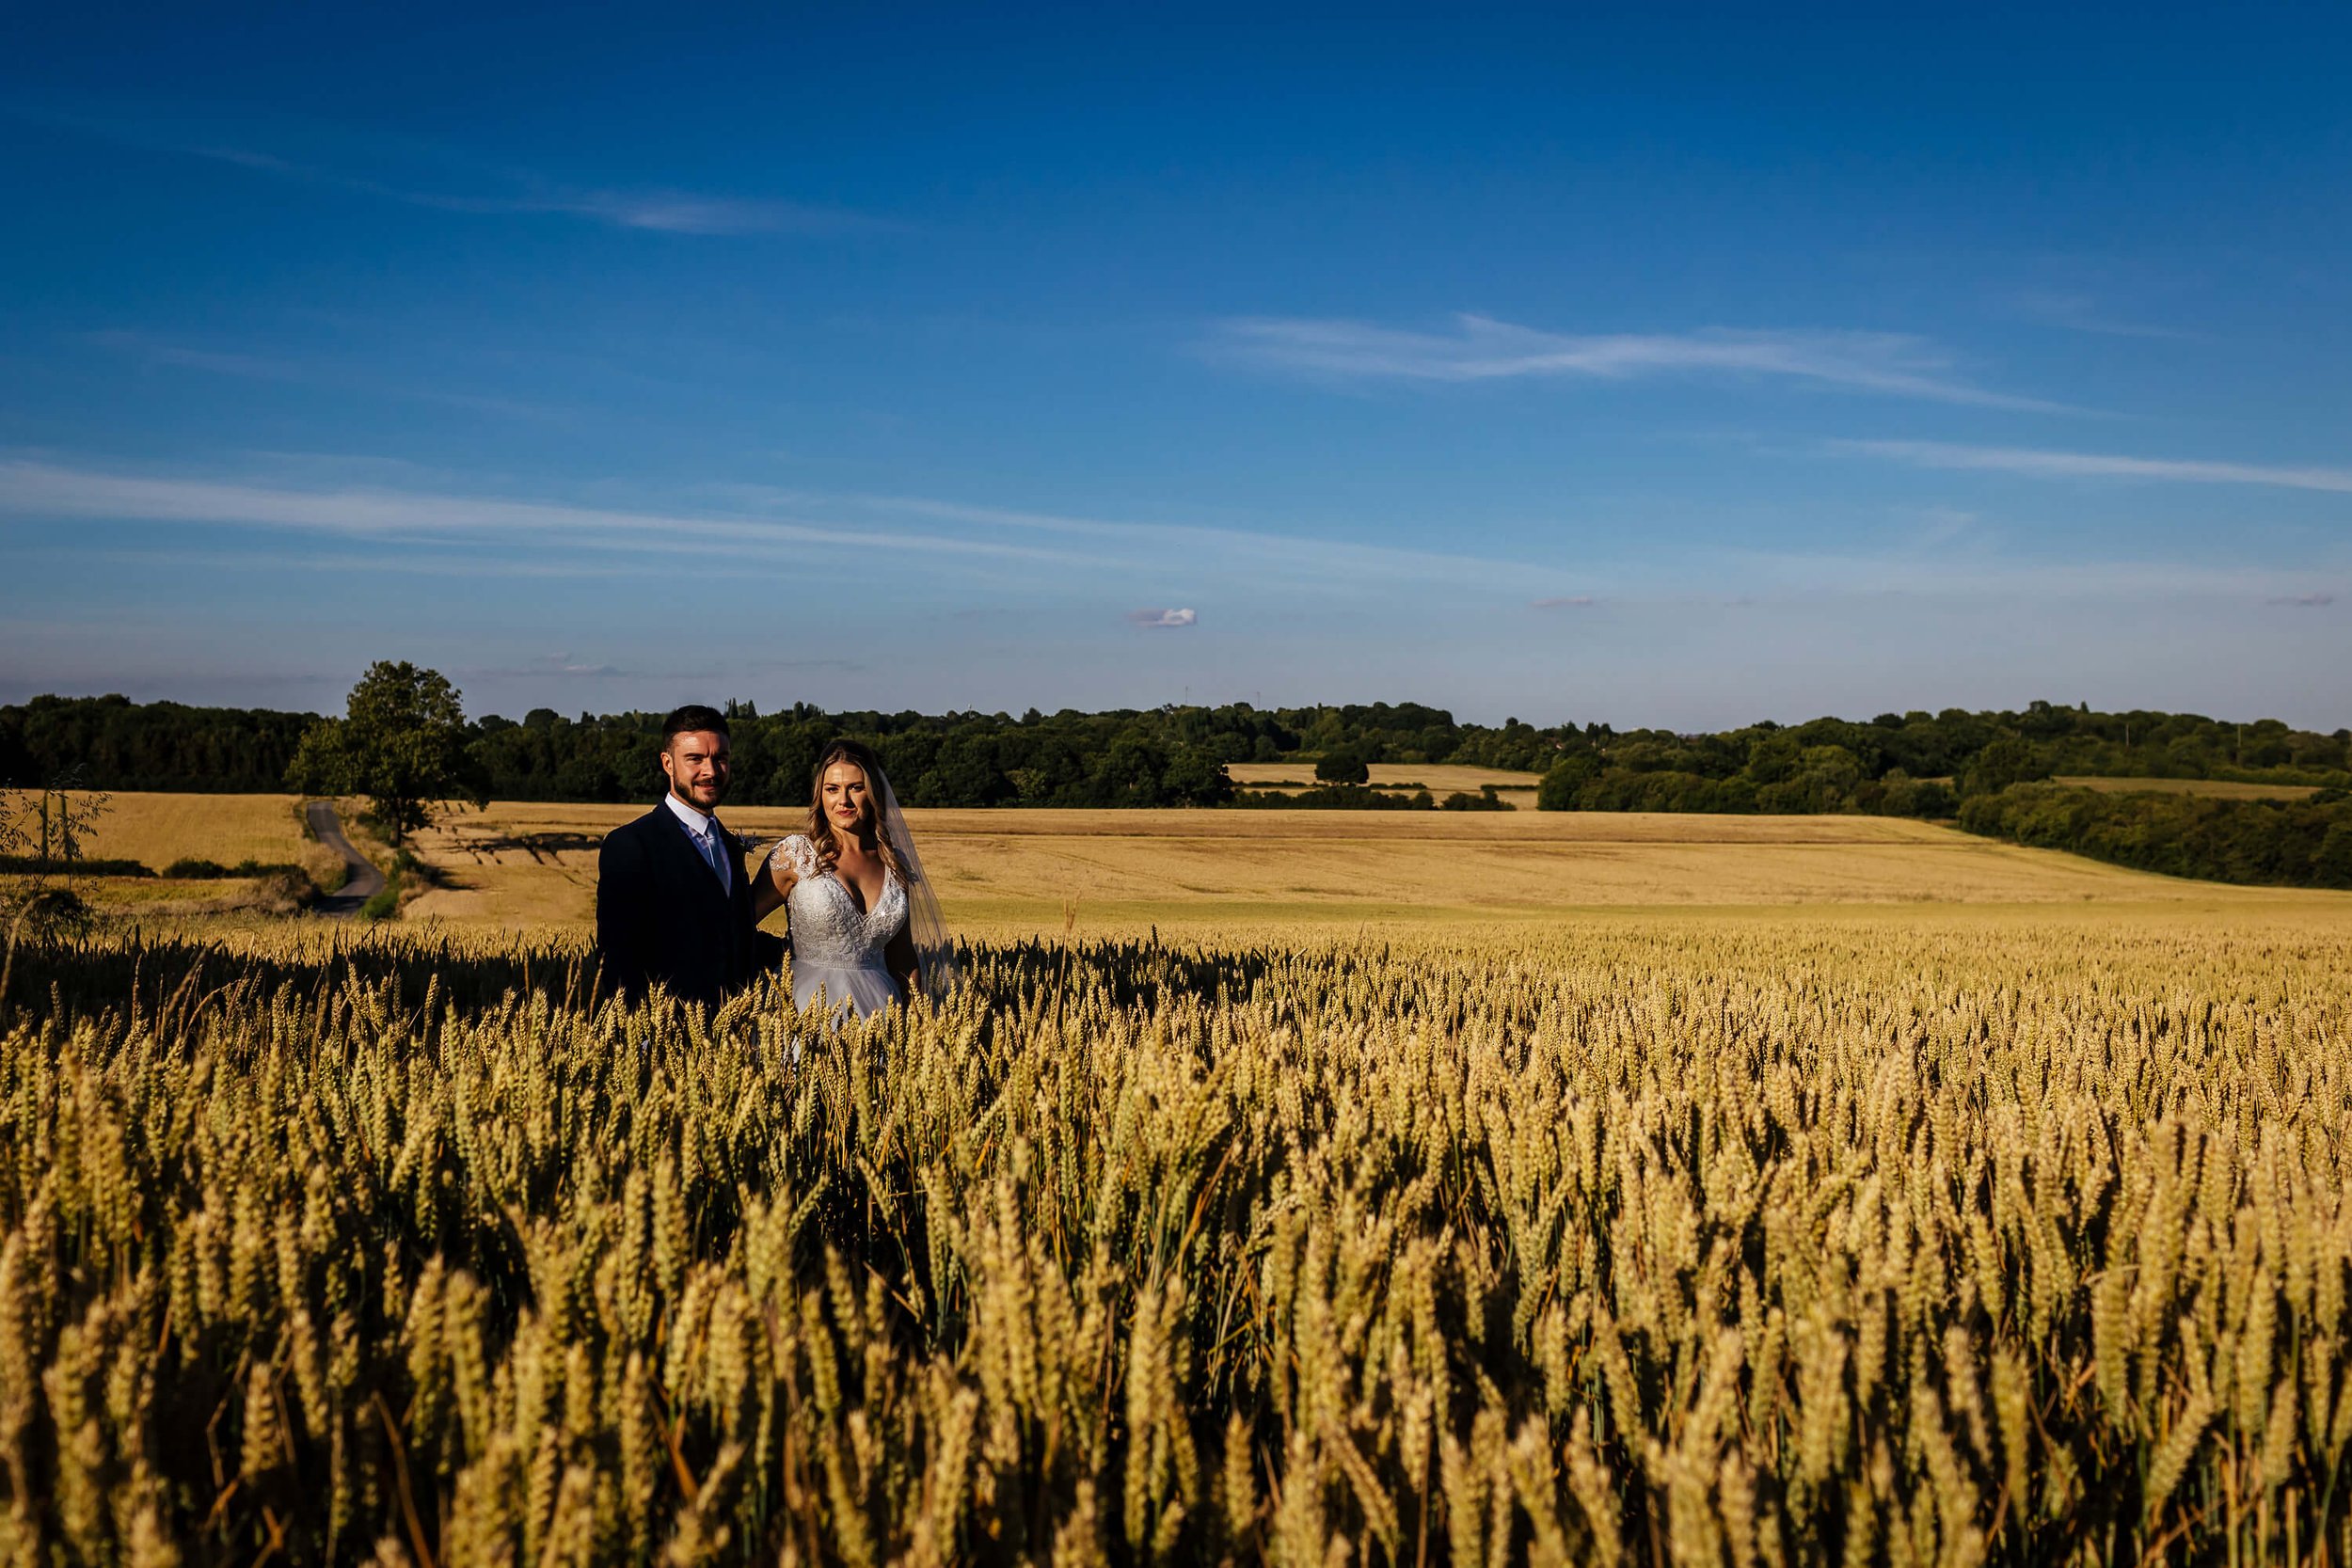 Amongst the wheat fields at a wedding in Nottinghamshire